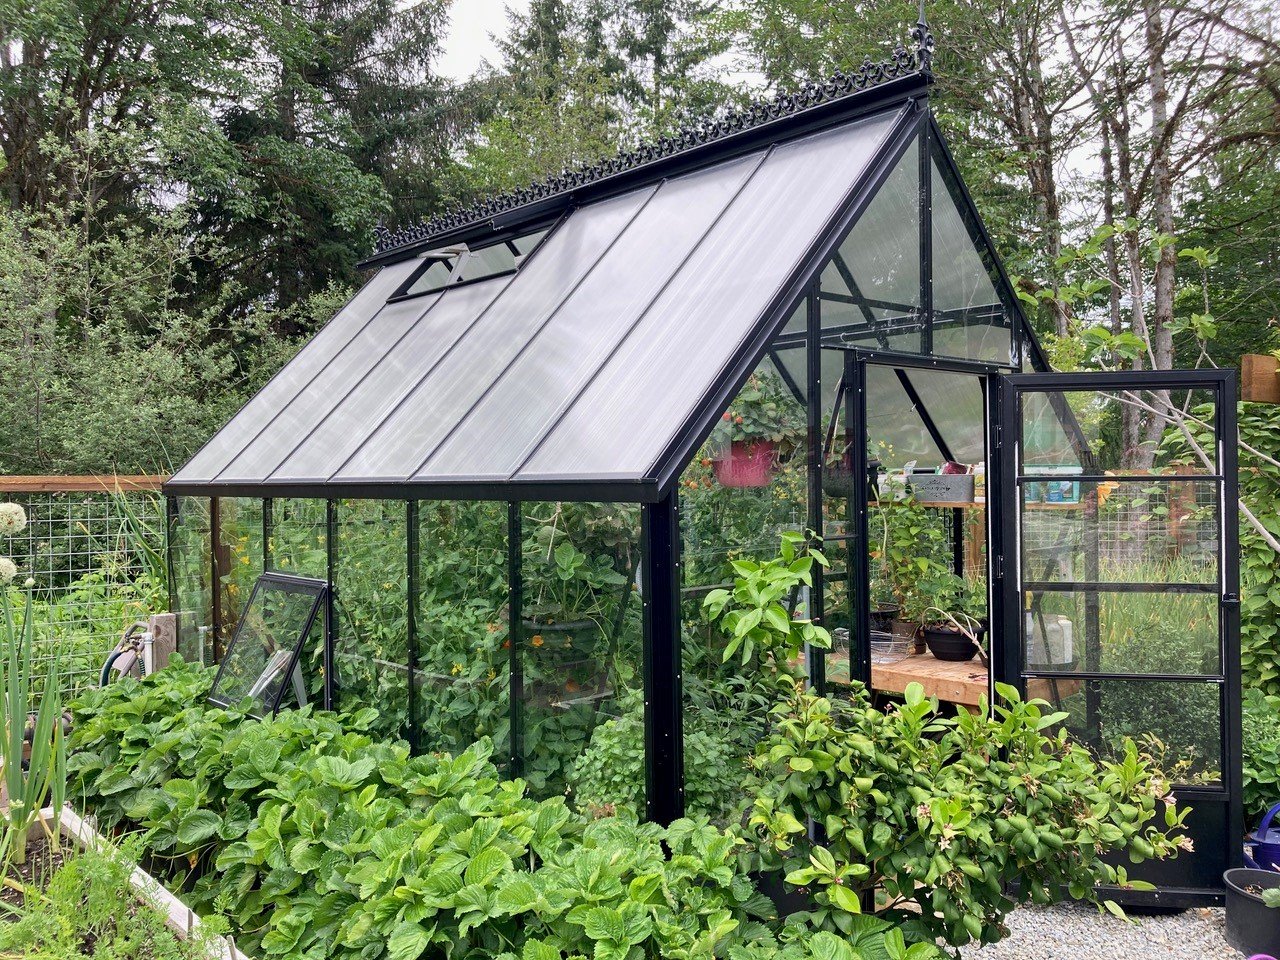 Cape Cod Greenhouse with leafy greens growing around it and inside the greenhouse. 